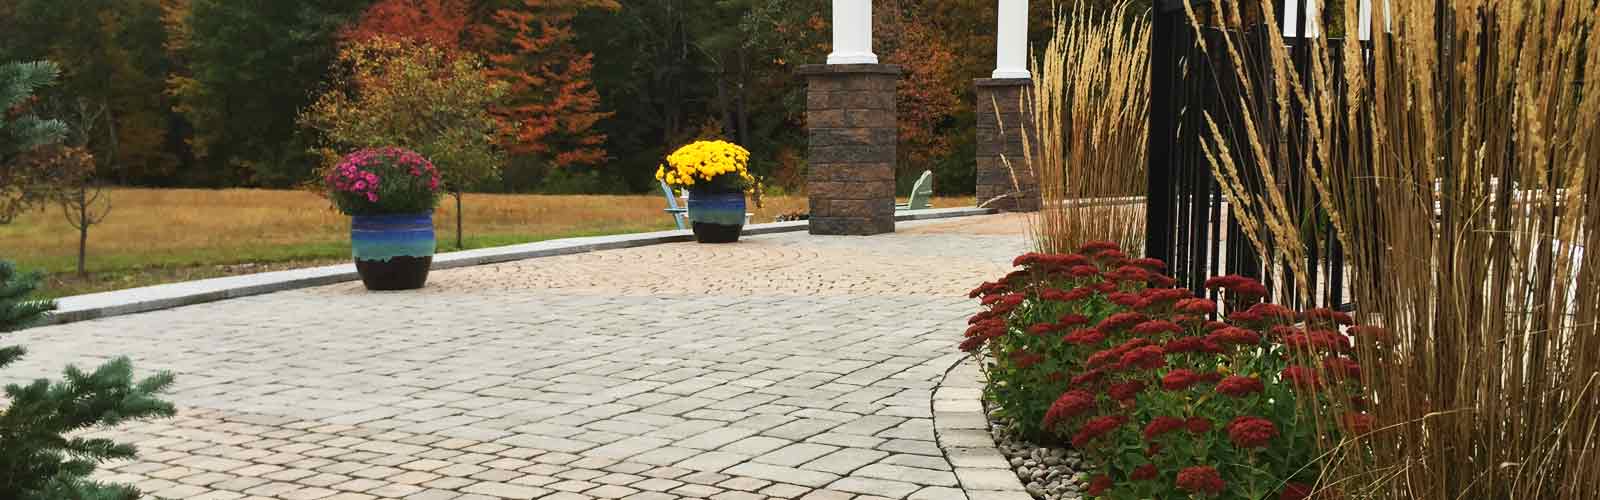 Ramsdell Landscaping Wells Maine, Ramsdell Landscaping Wells Maine